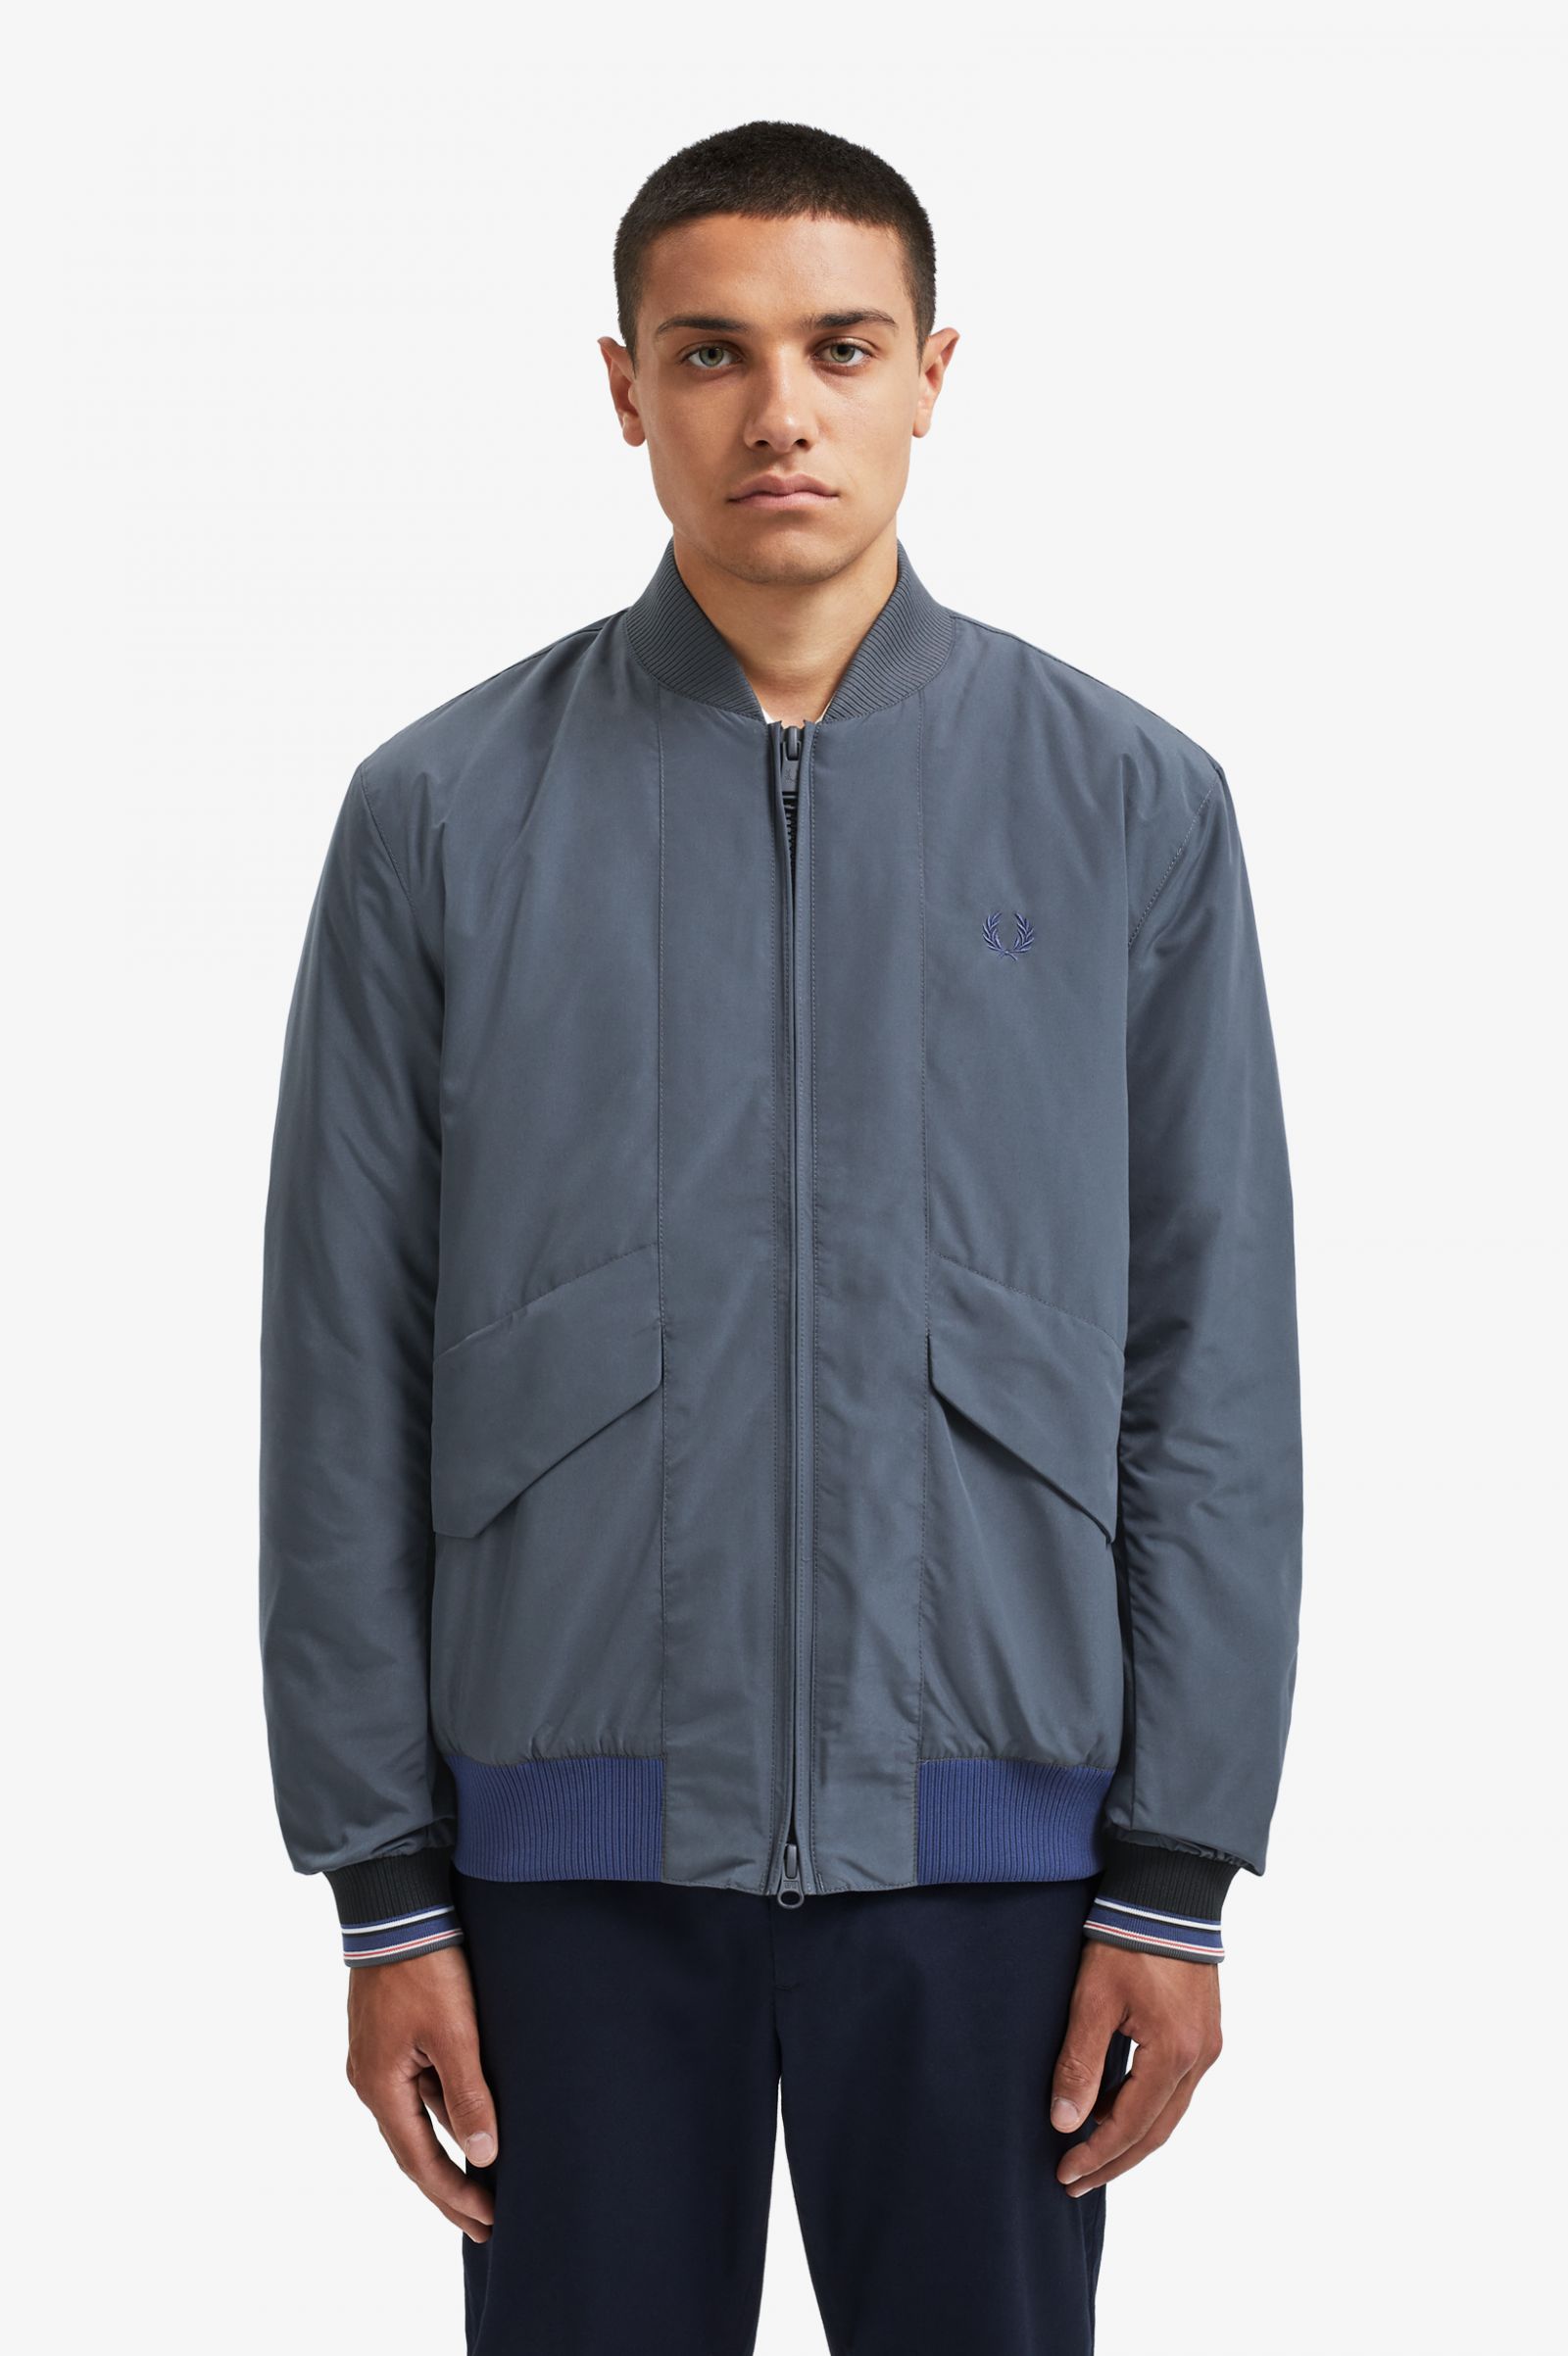 Quilted Bomber Jacket - Charcoal | Mens Coats & Jackets | Bomber ...